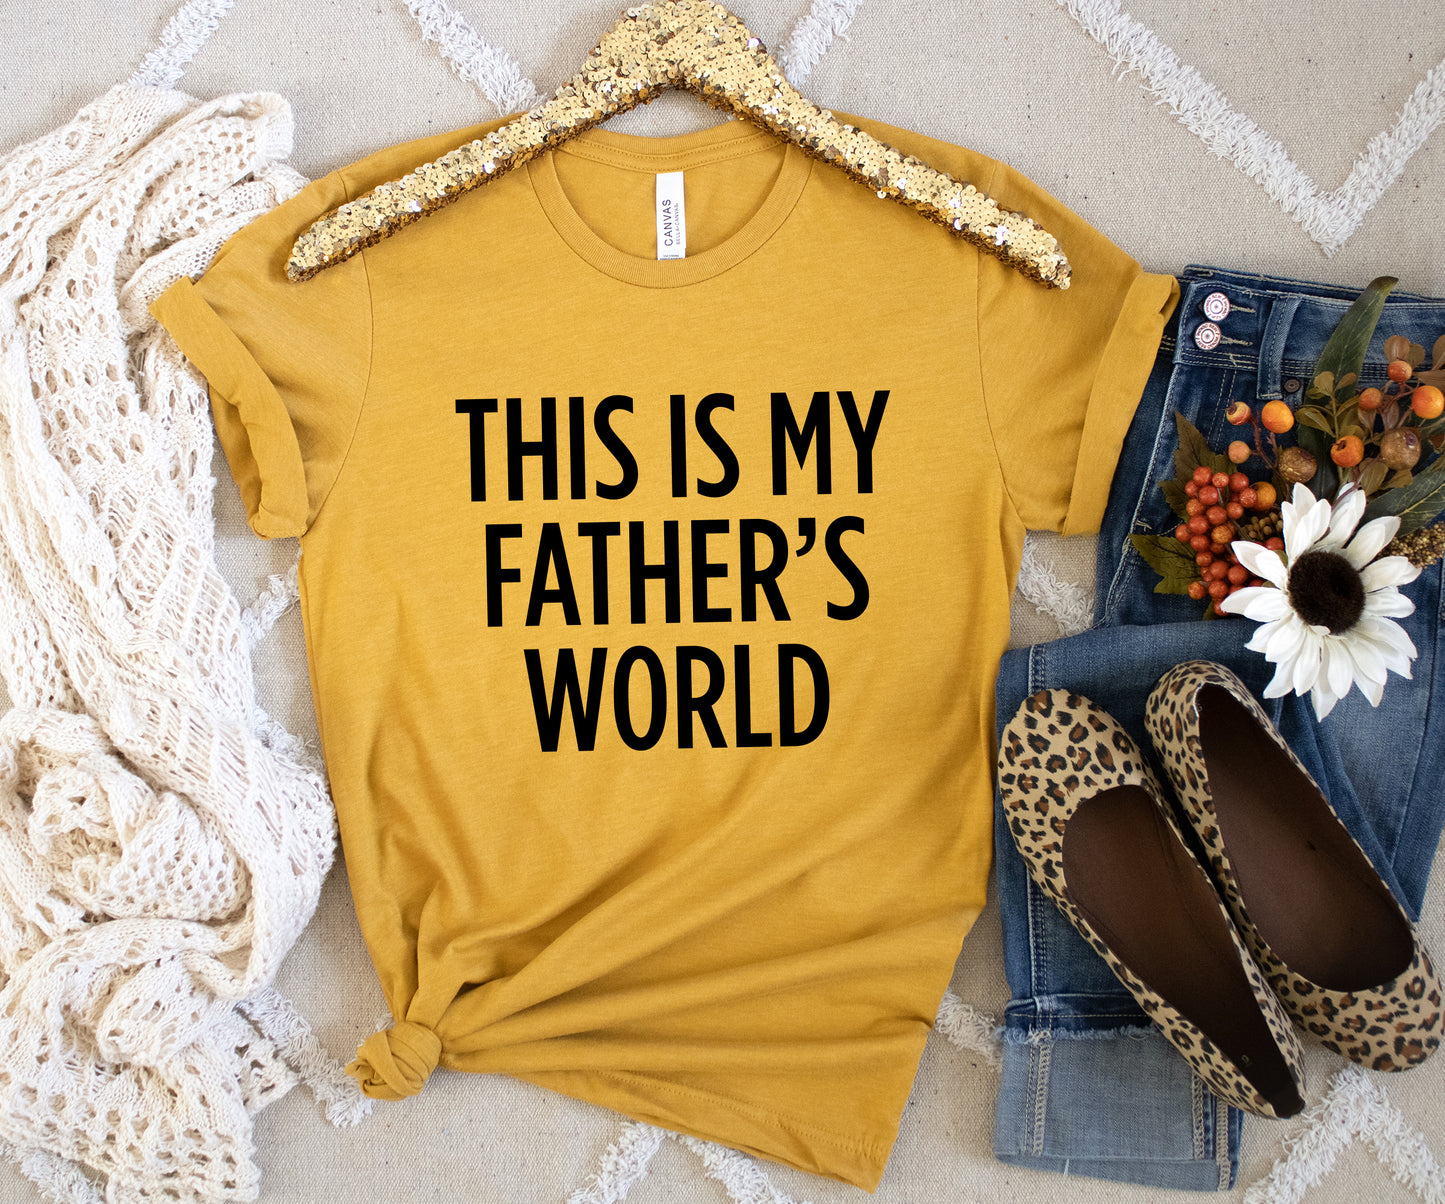 This is My Father's World T-shirt